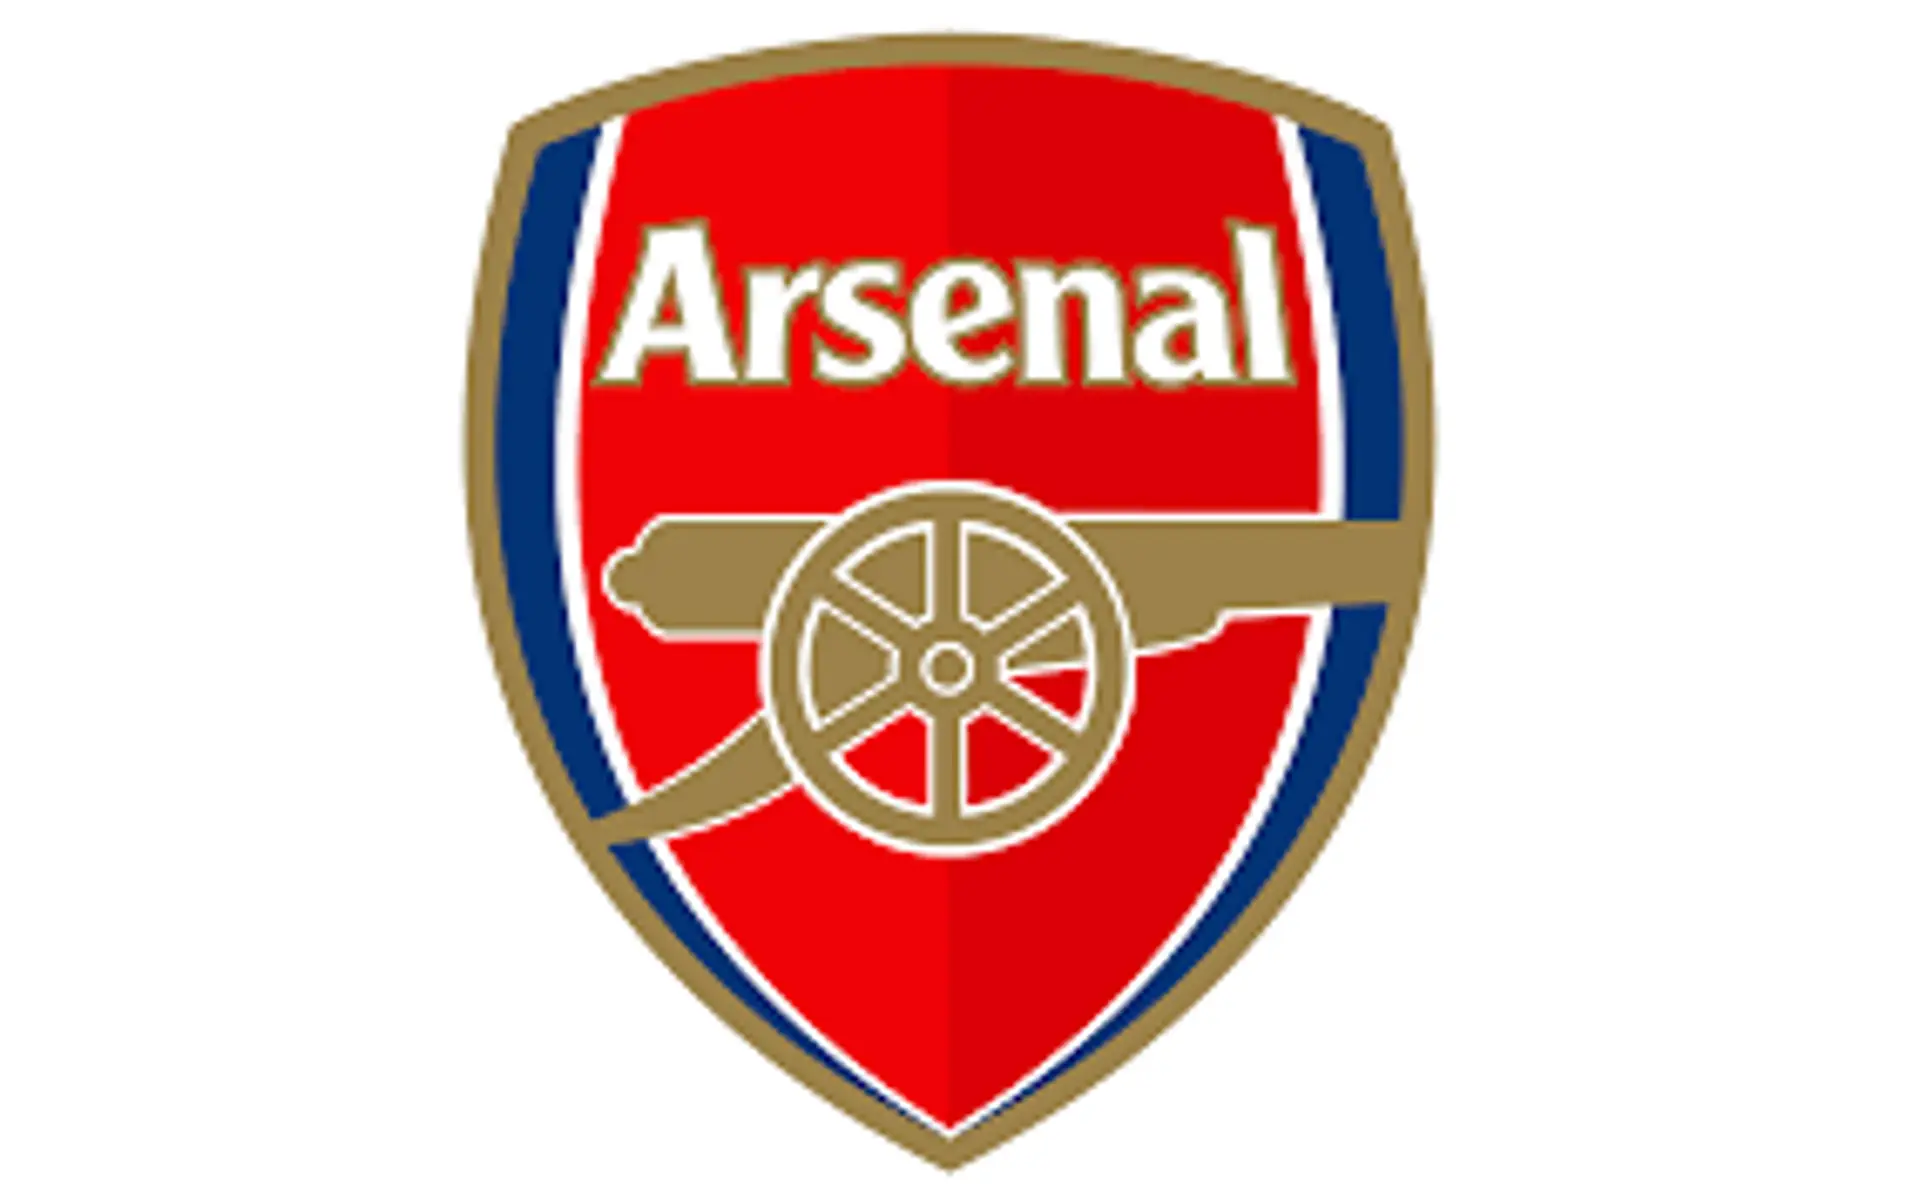 Arsenal and title 